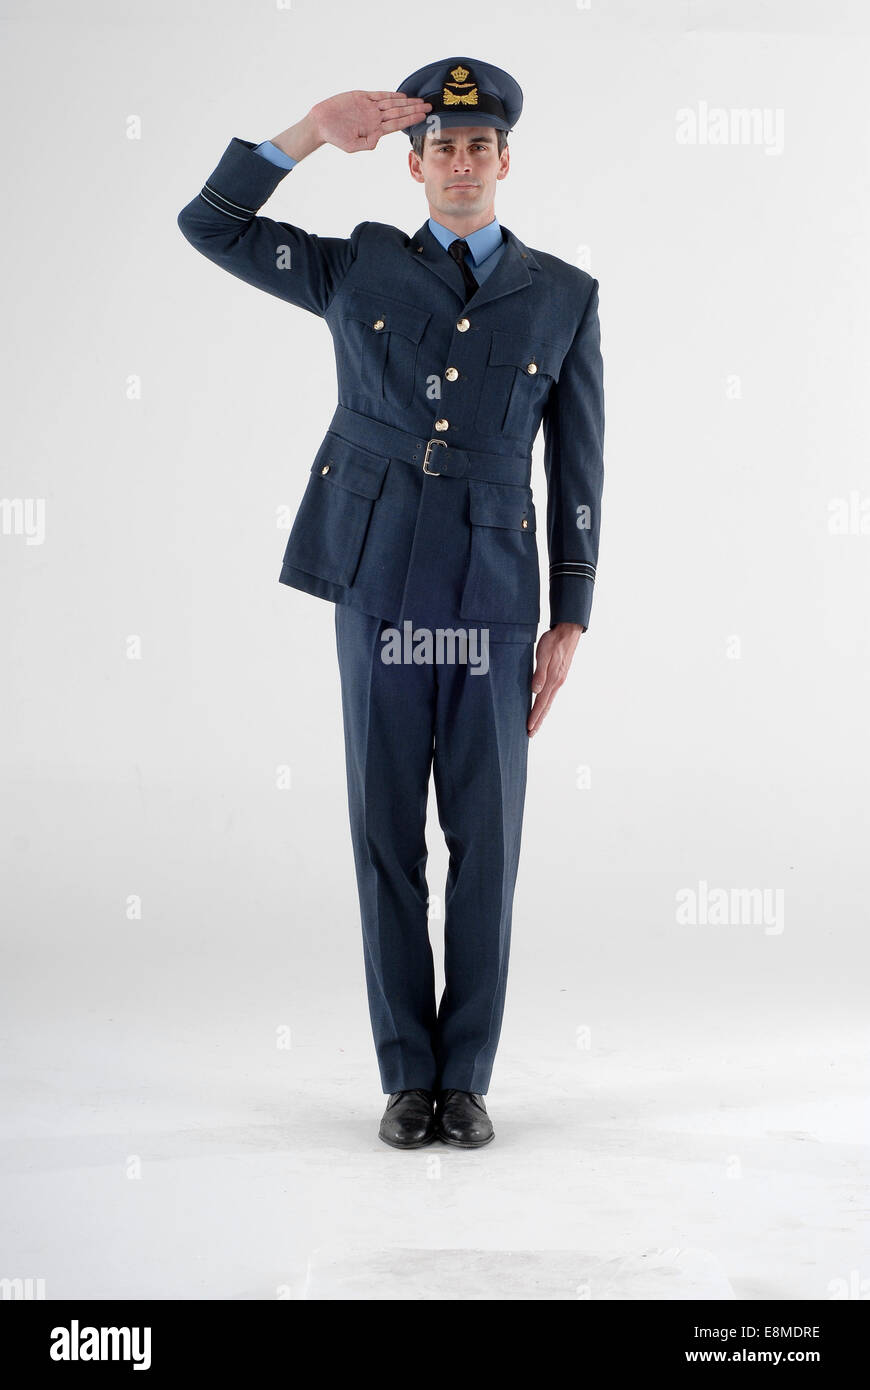 man in comedy costume fancy dress as a royal air force fighter pilot captain in full military uniform Stock Photo